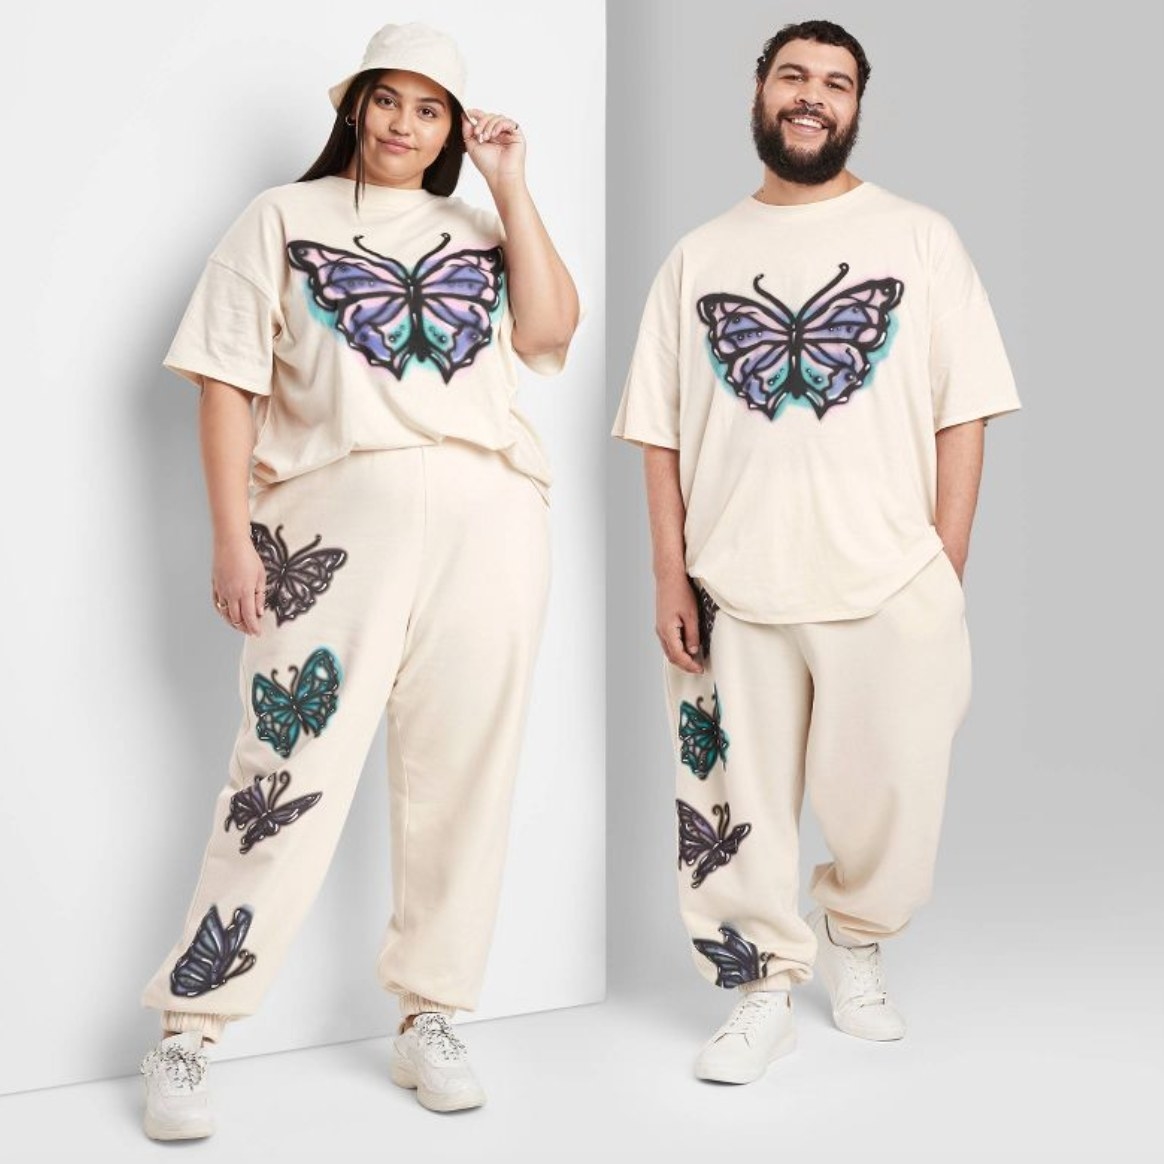 two models wearing the sweatpants and matching shirts